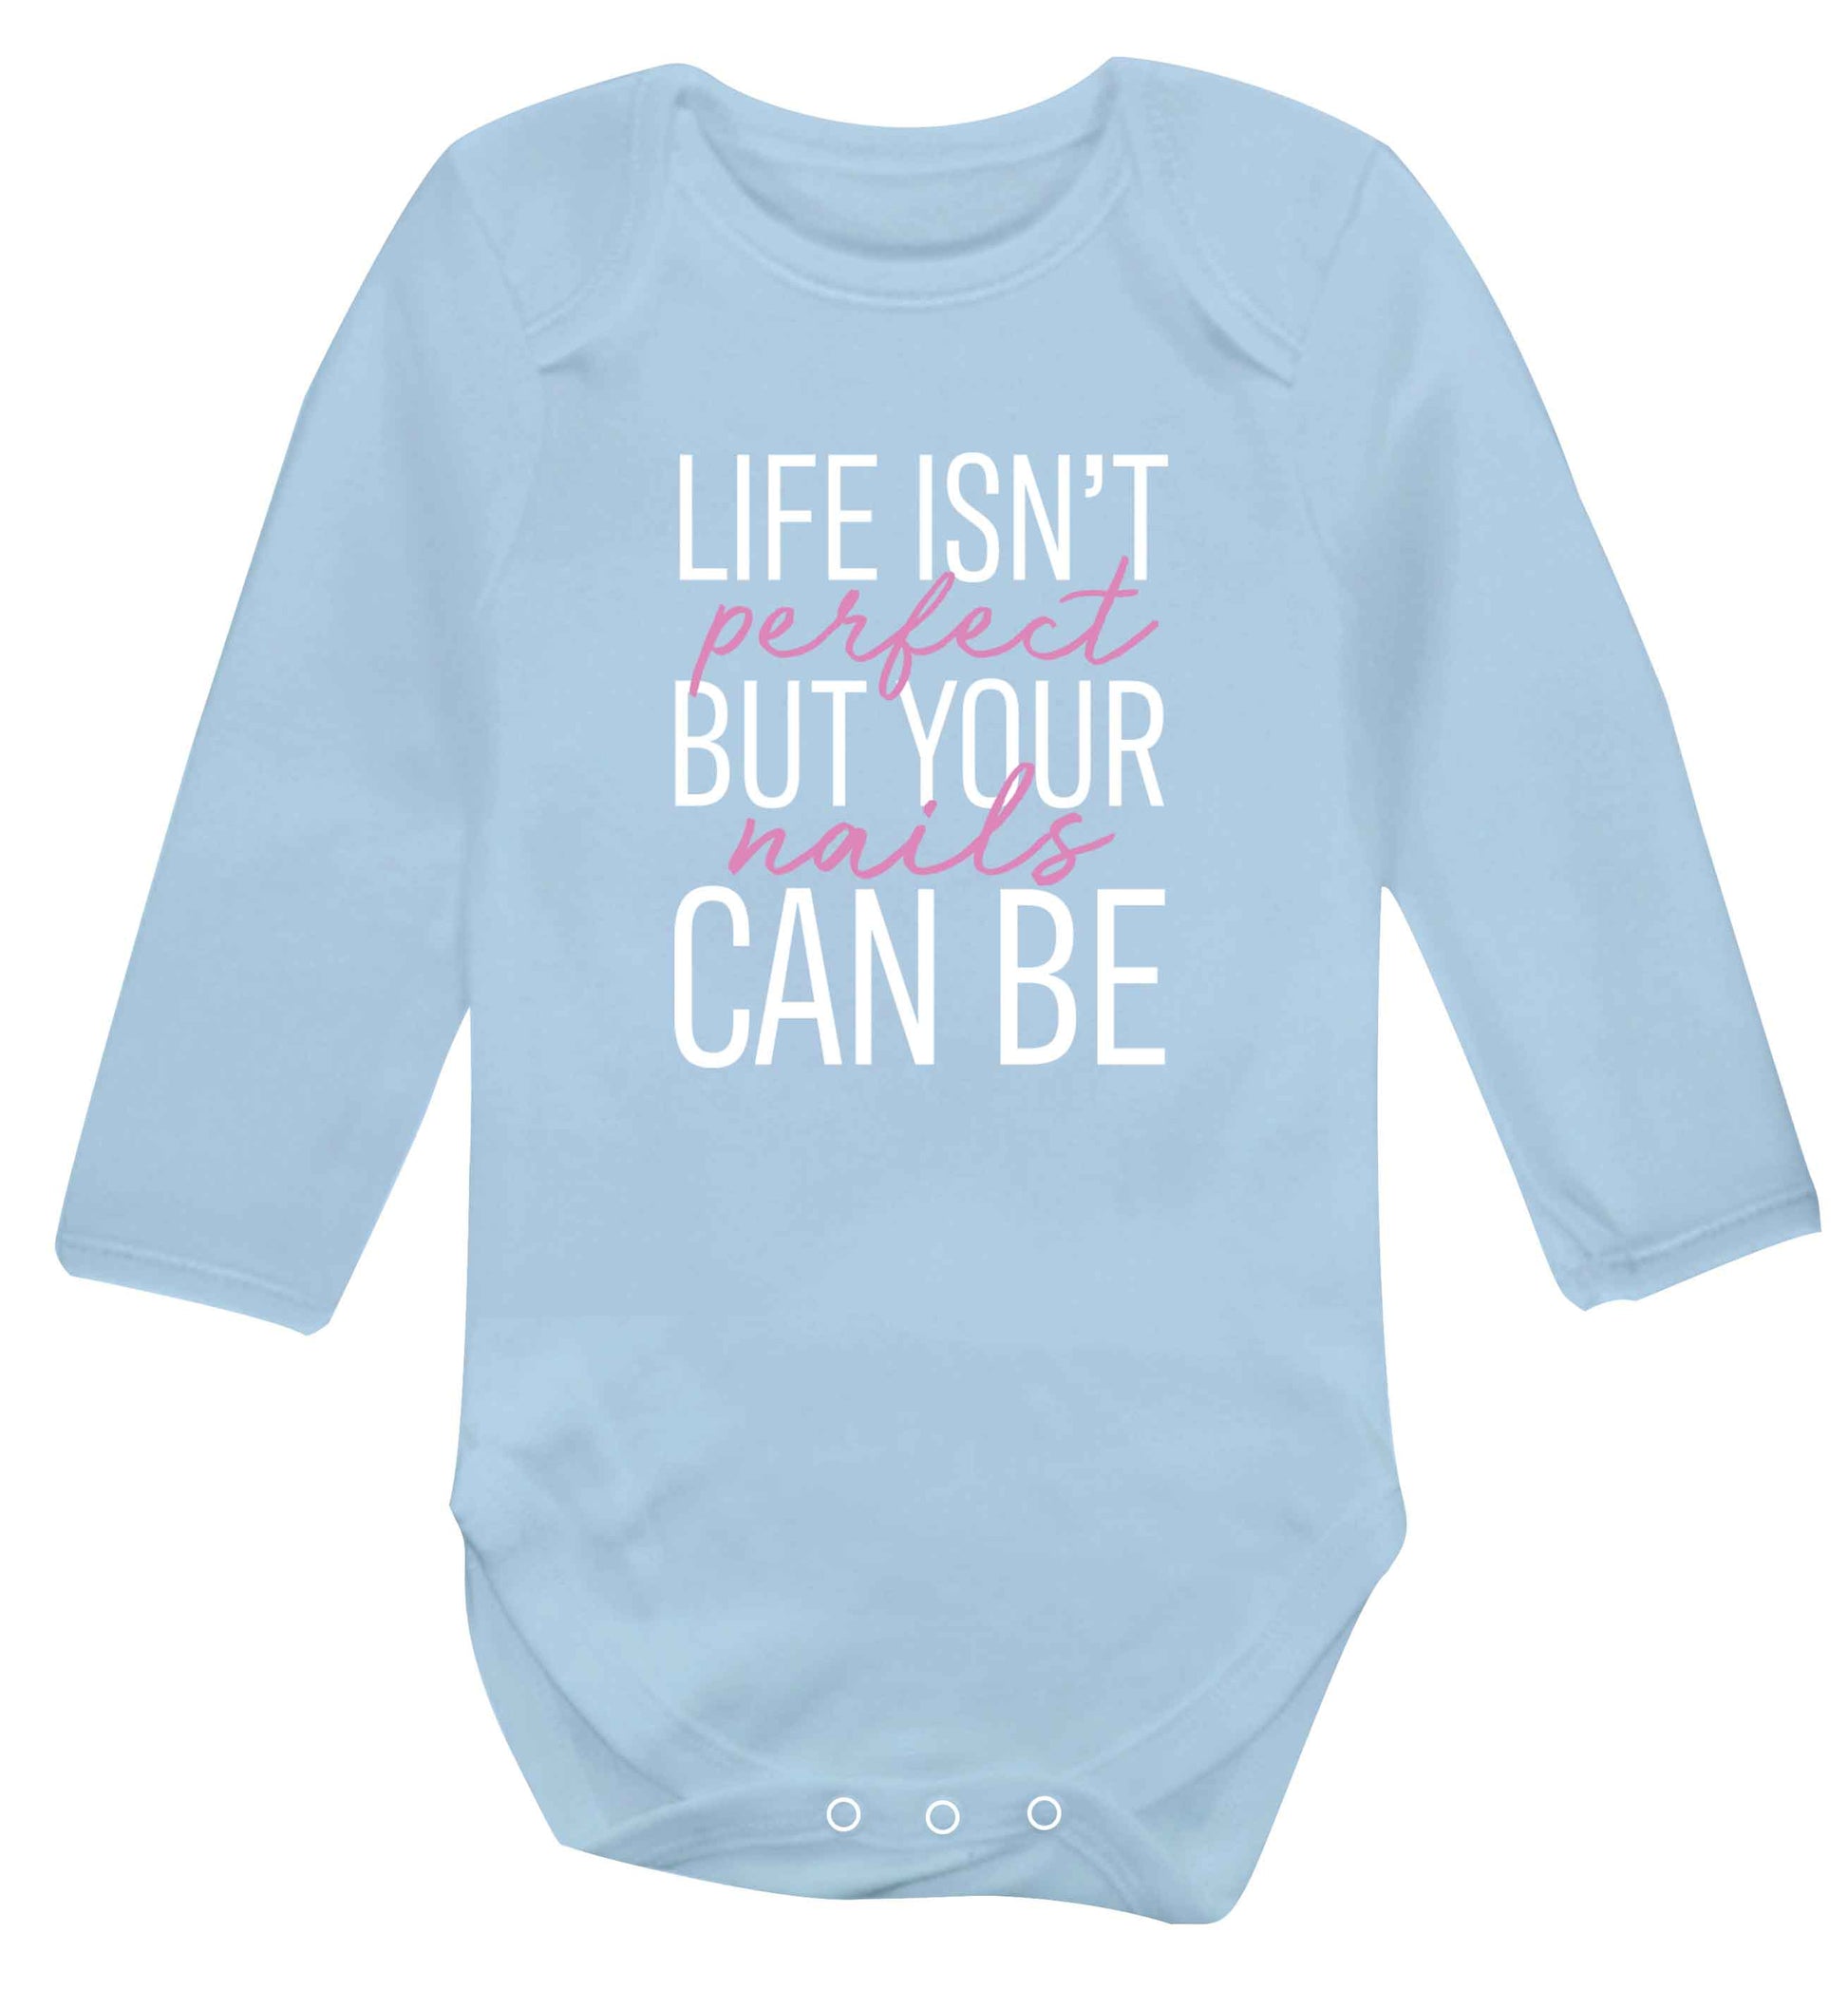 Life isn't perfect but your nails can be baby vest long sleeved pale blue 6-12 months